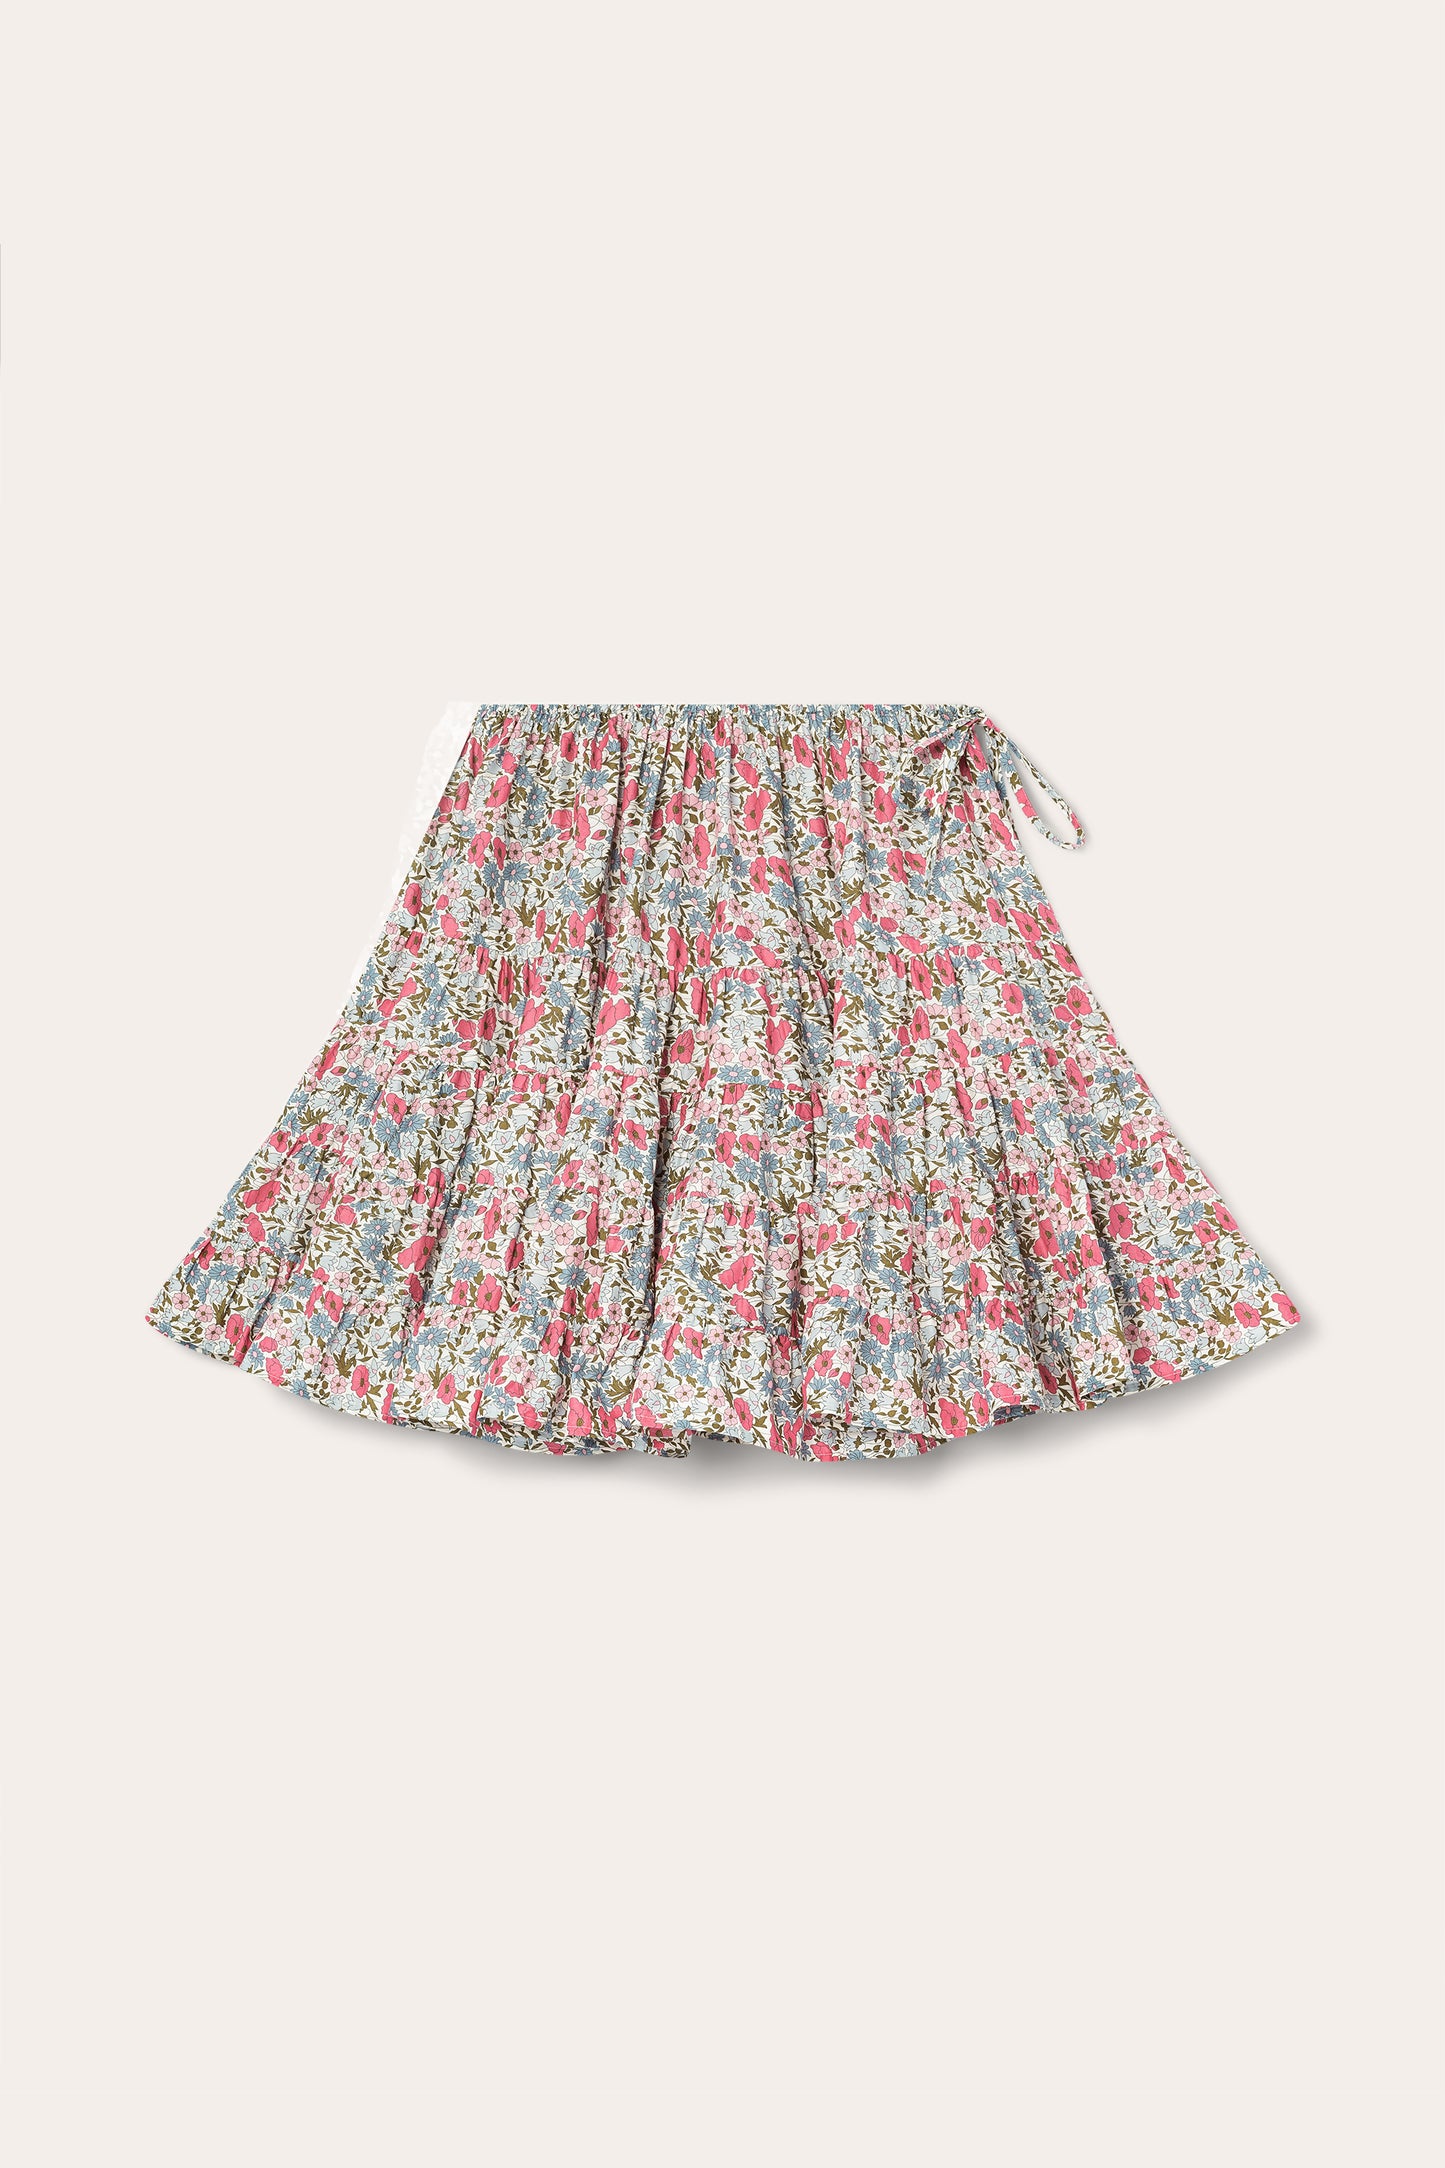 Hill Skirt in Liberty Pink Print